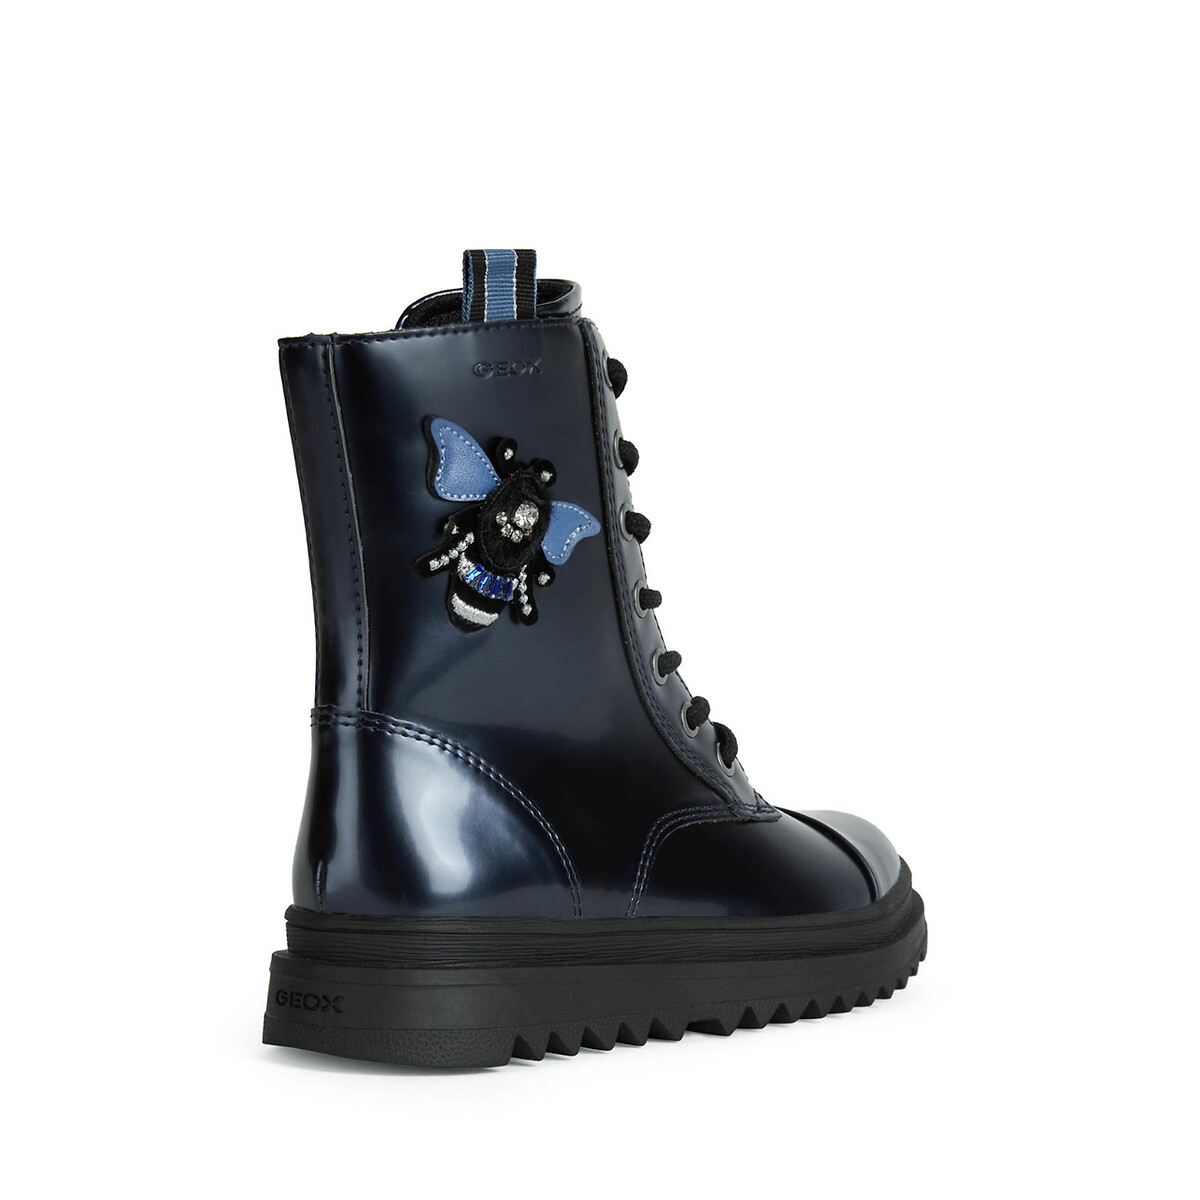 Botas transpirables de charol gillyjaw oscuro Geox | Redoute